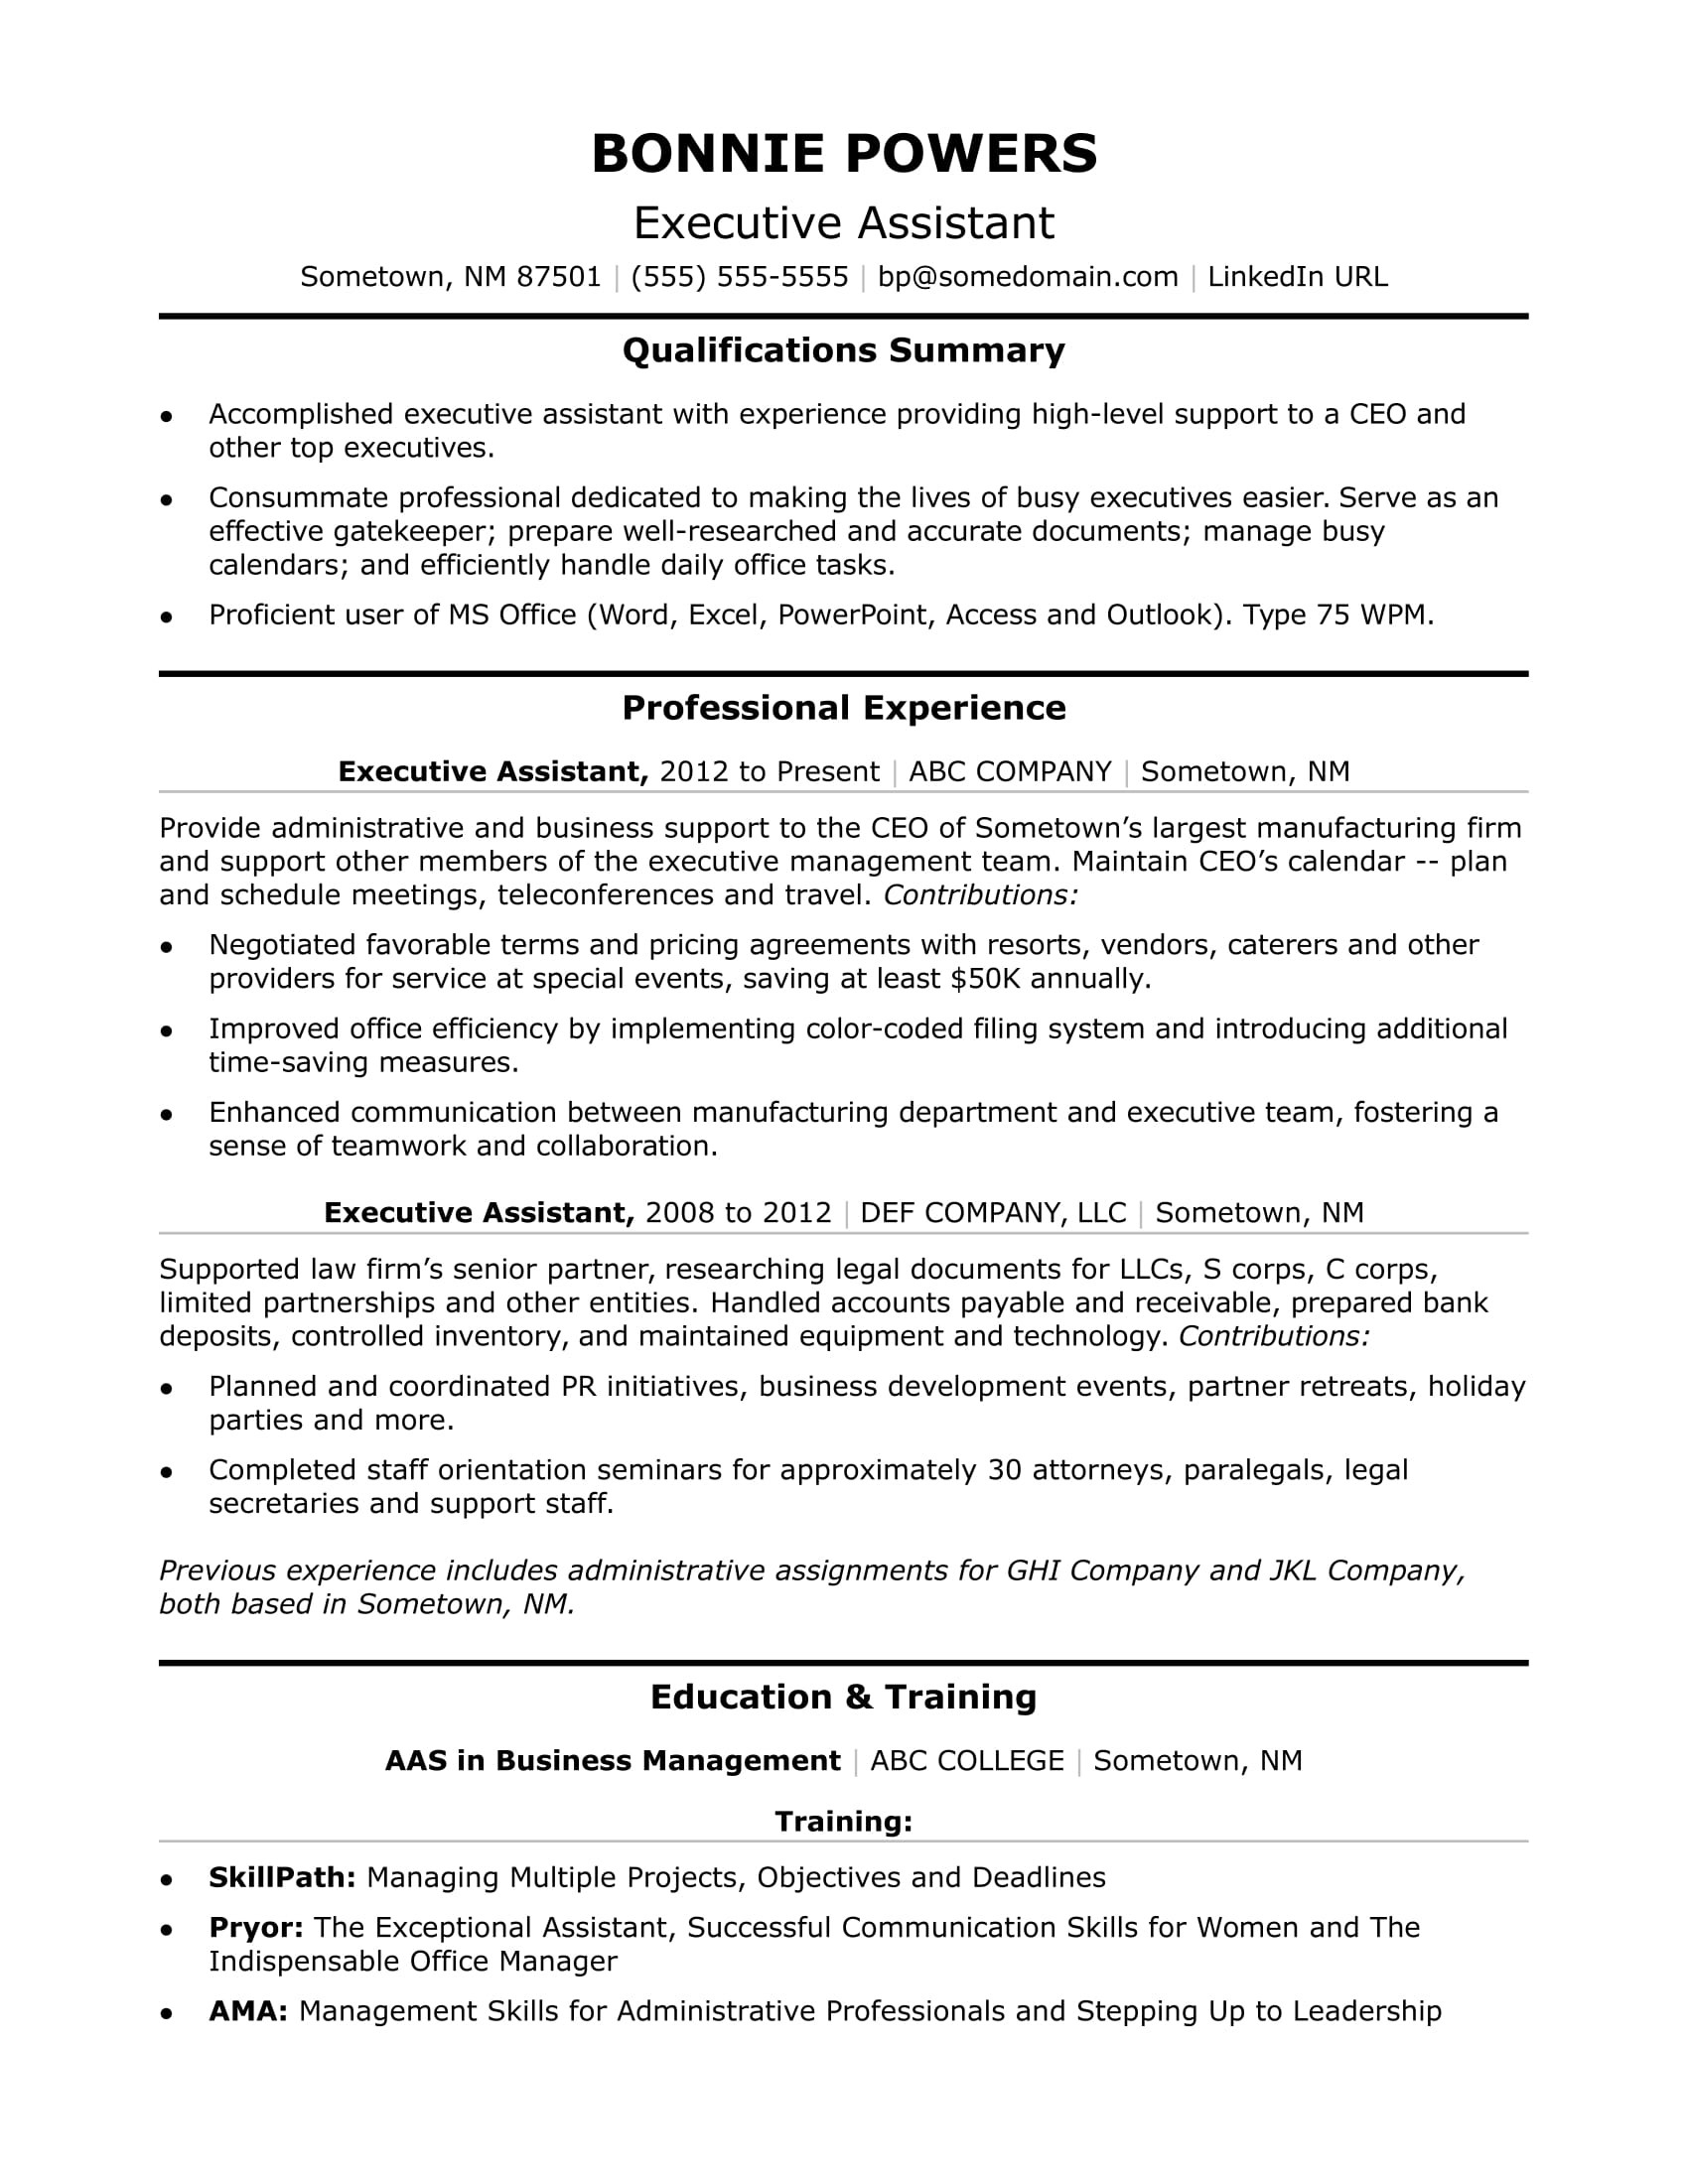 Summary Of Qualifications Sample Resume for Administrative assistant Executive Administrative assistant Resume Sample